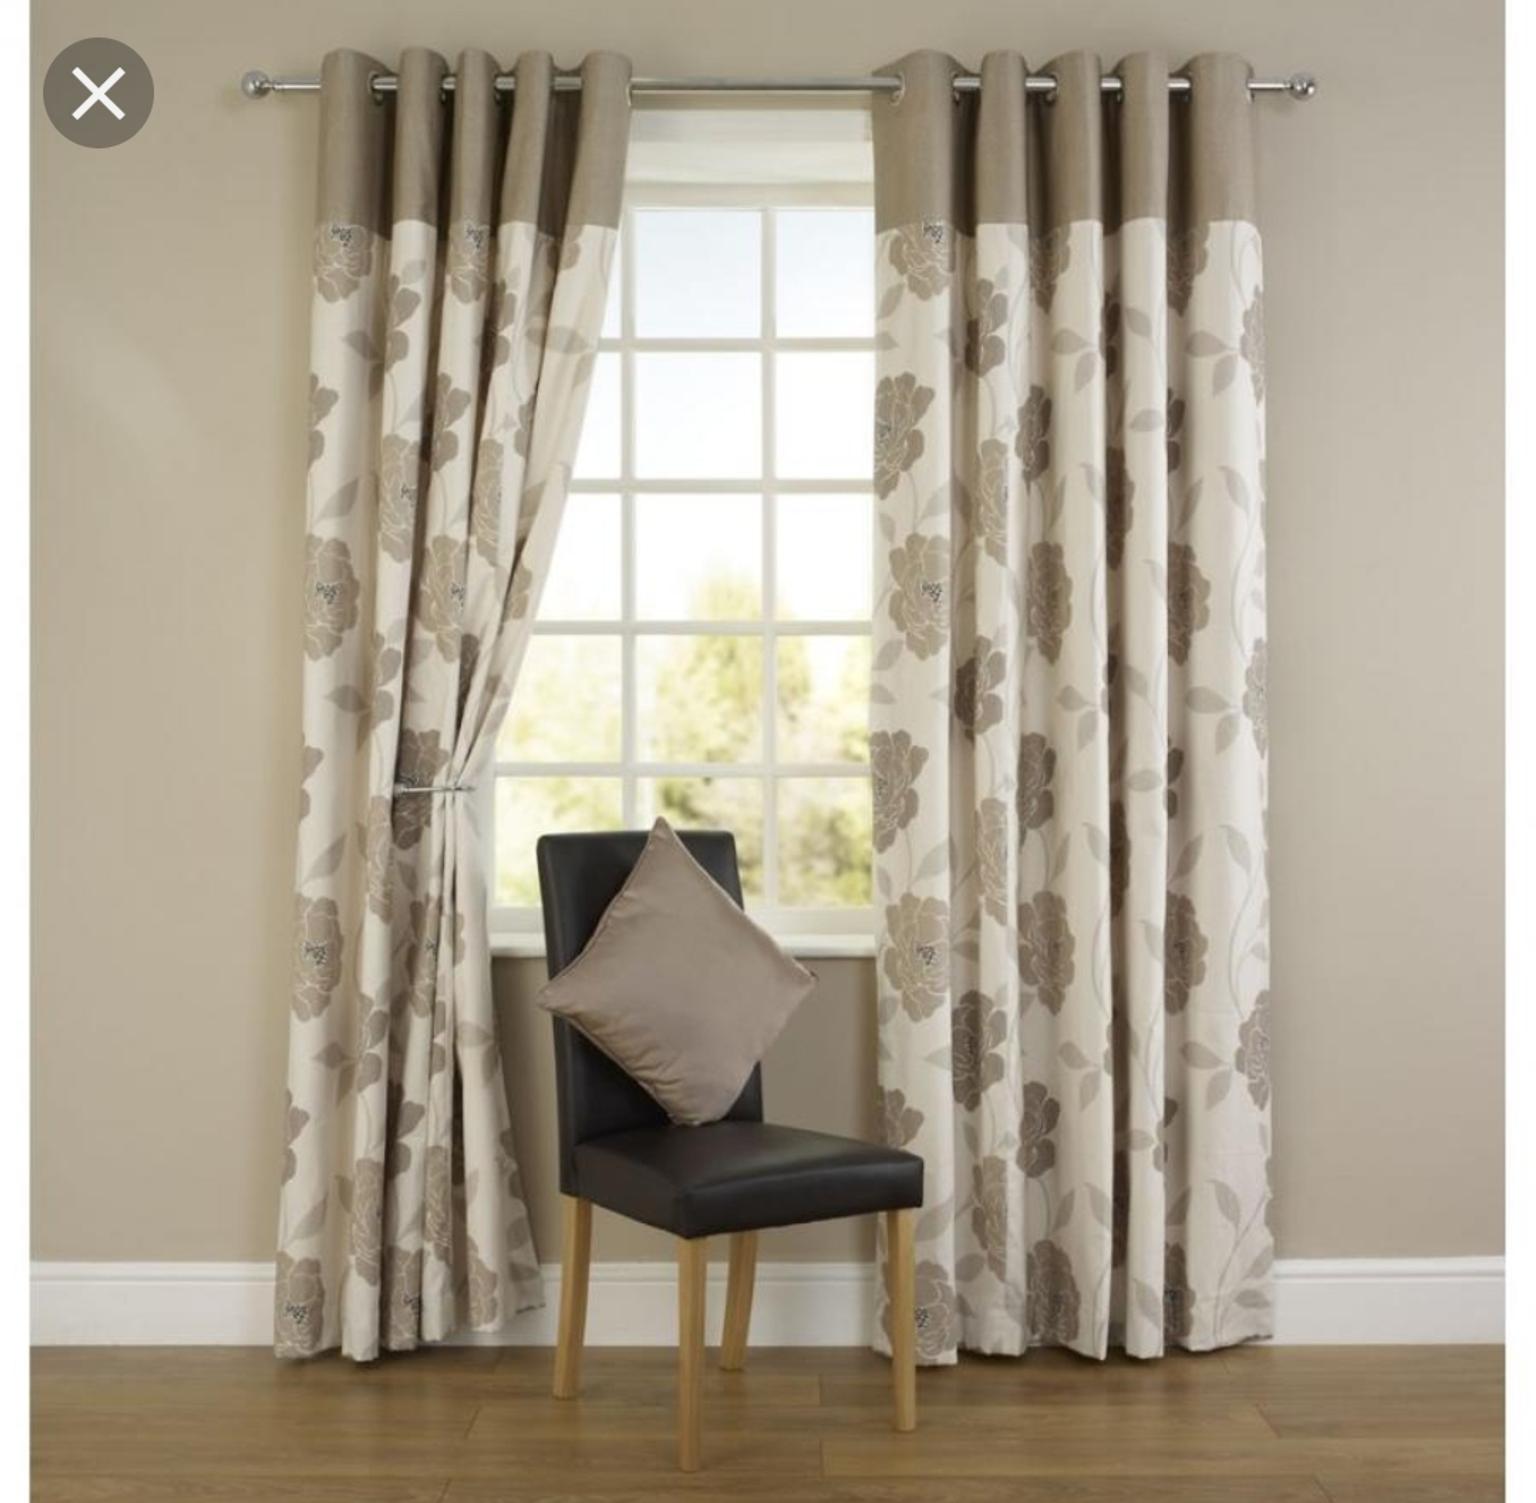 Wilko Eyelet Curtains In B29 Birmingham For 20 00 For Sale Shpock